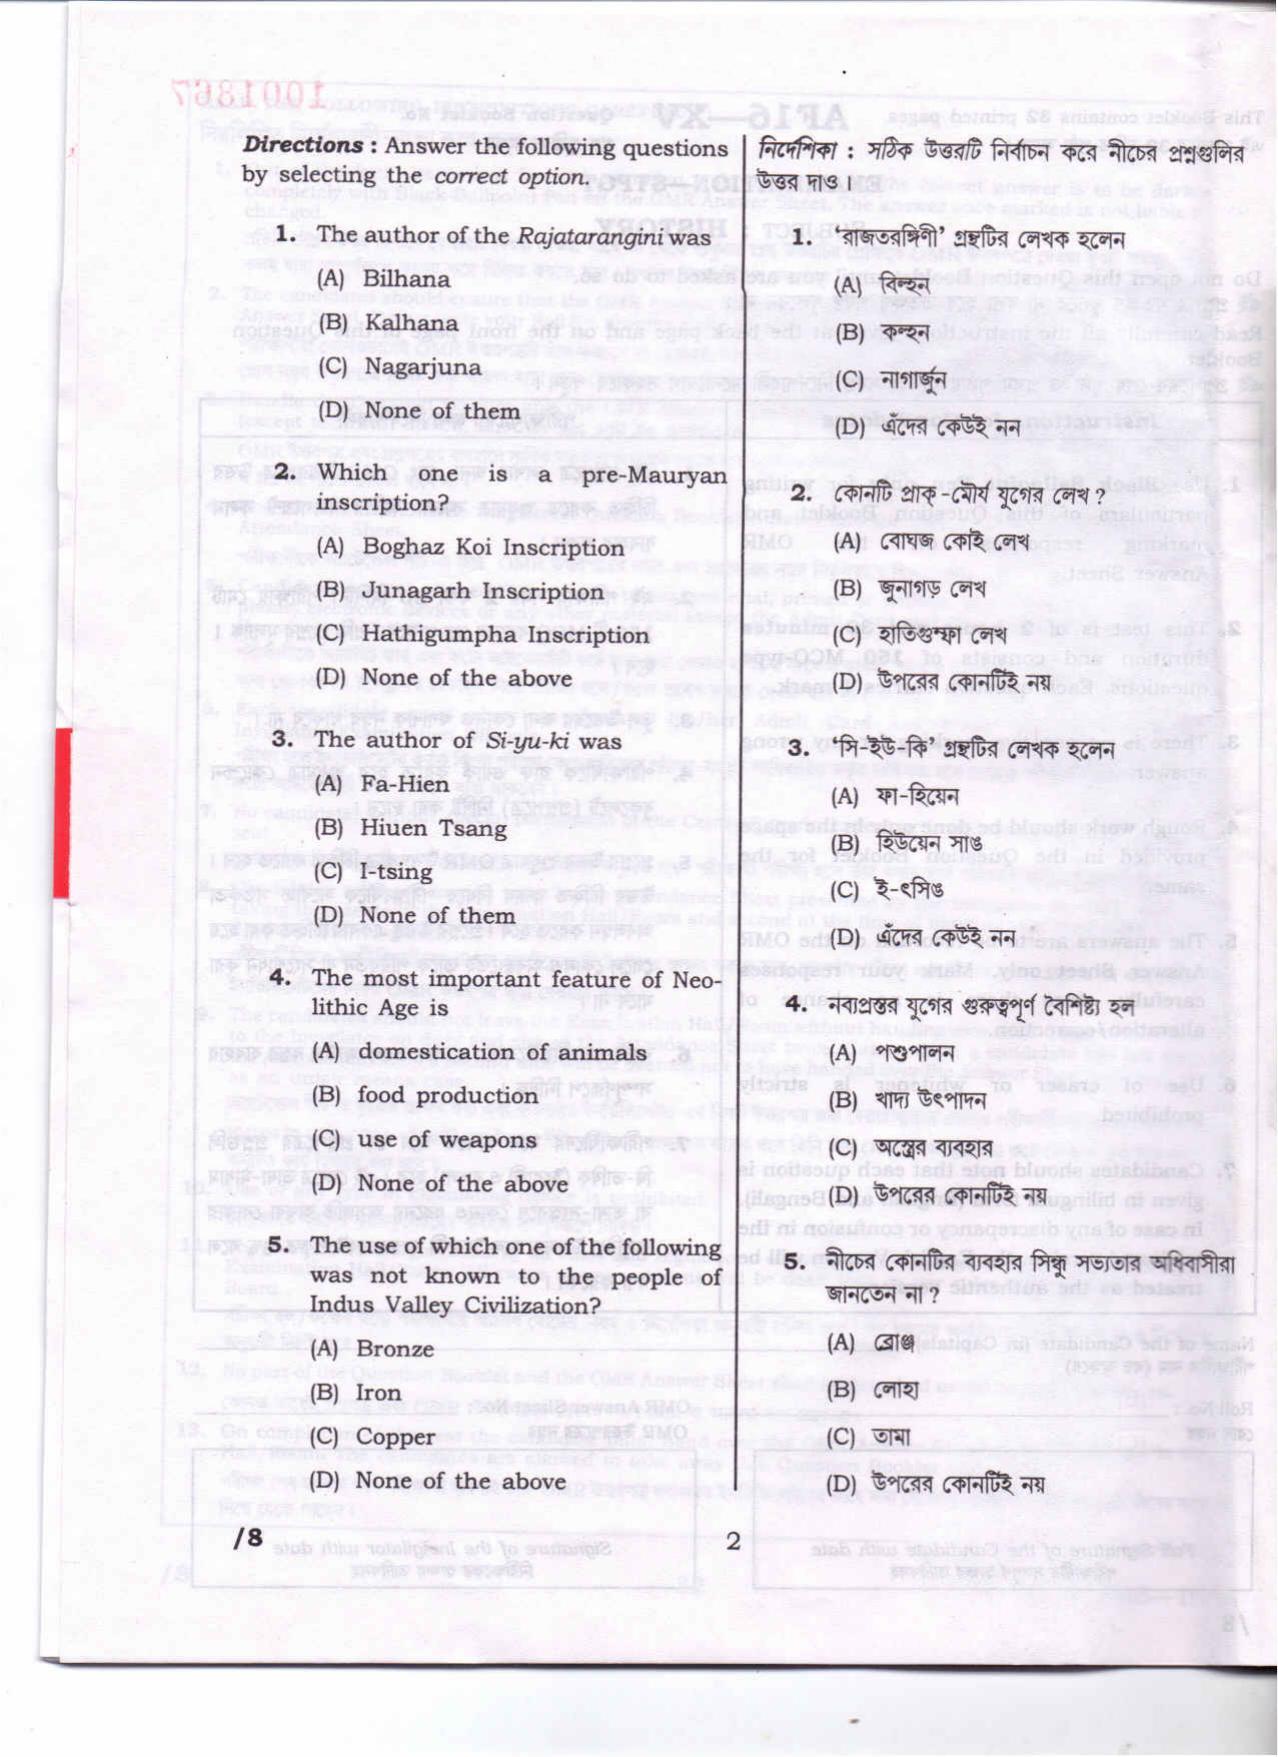 Lala Lajpat Rai University of Veterinary and Animal Sciences Papers - History - Page 9